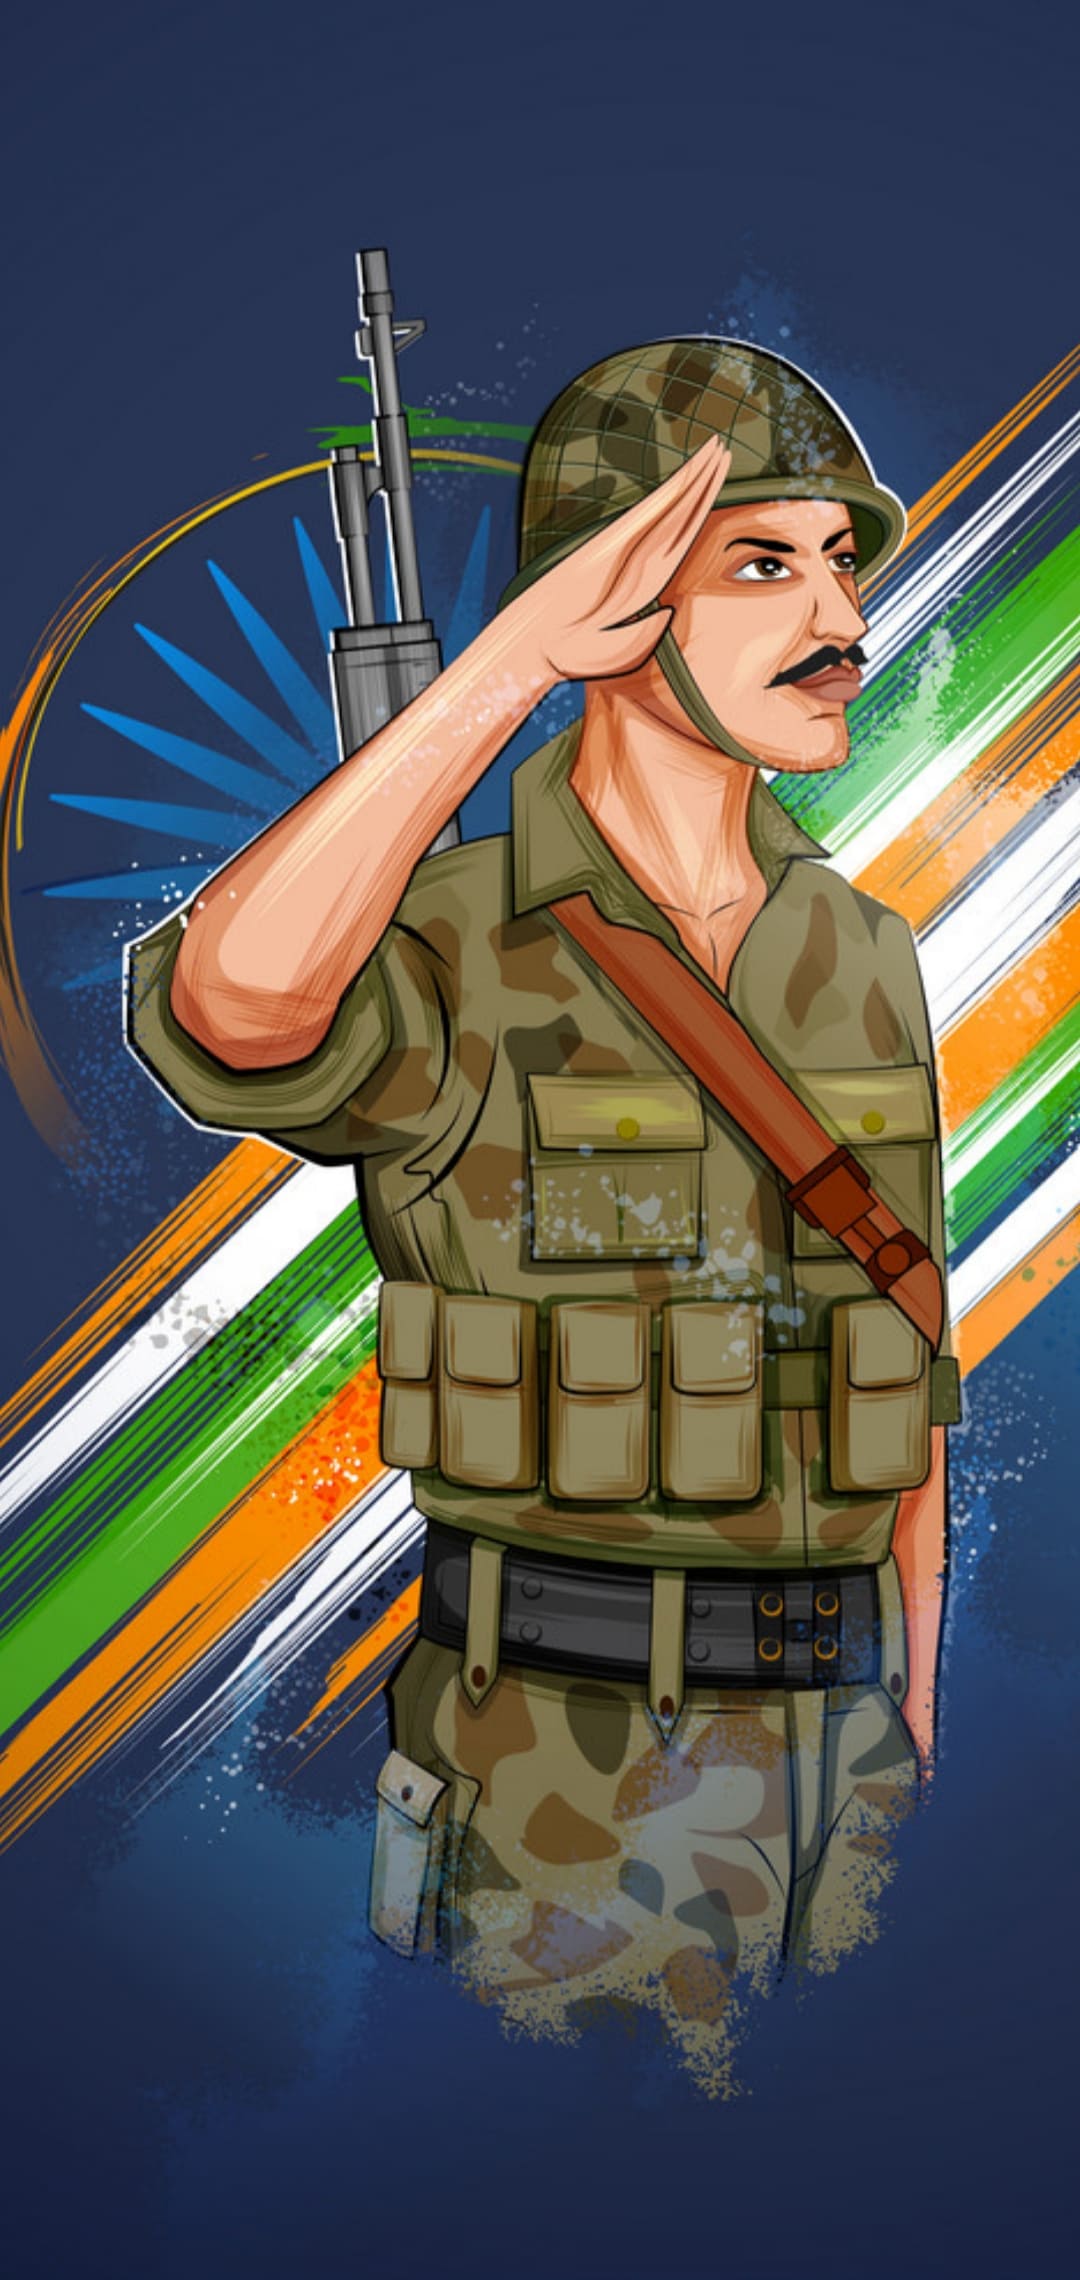 indian army dress wallpaper